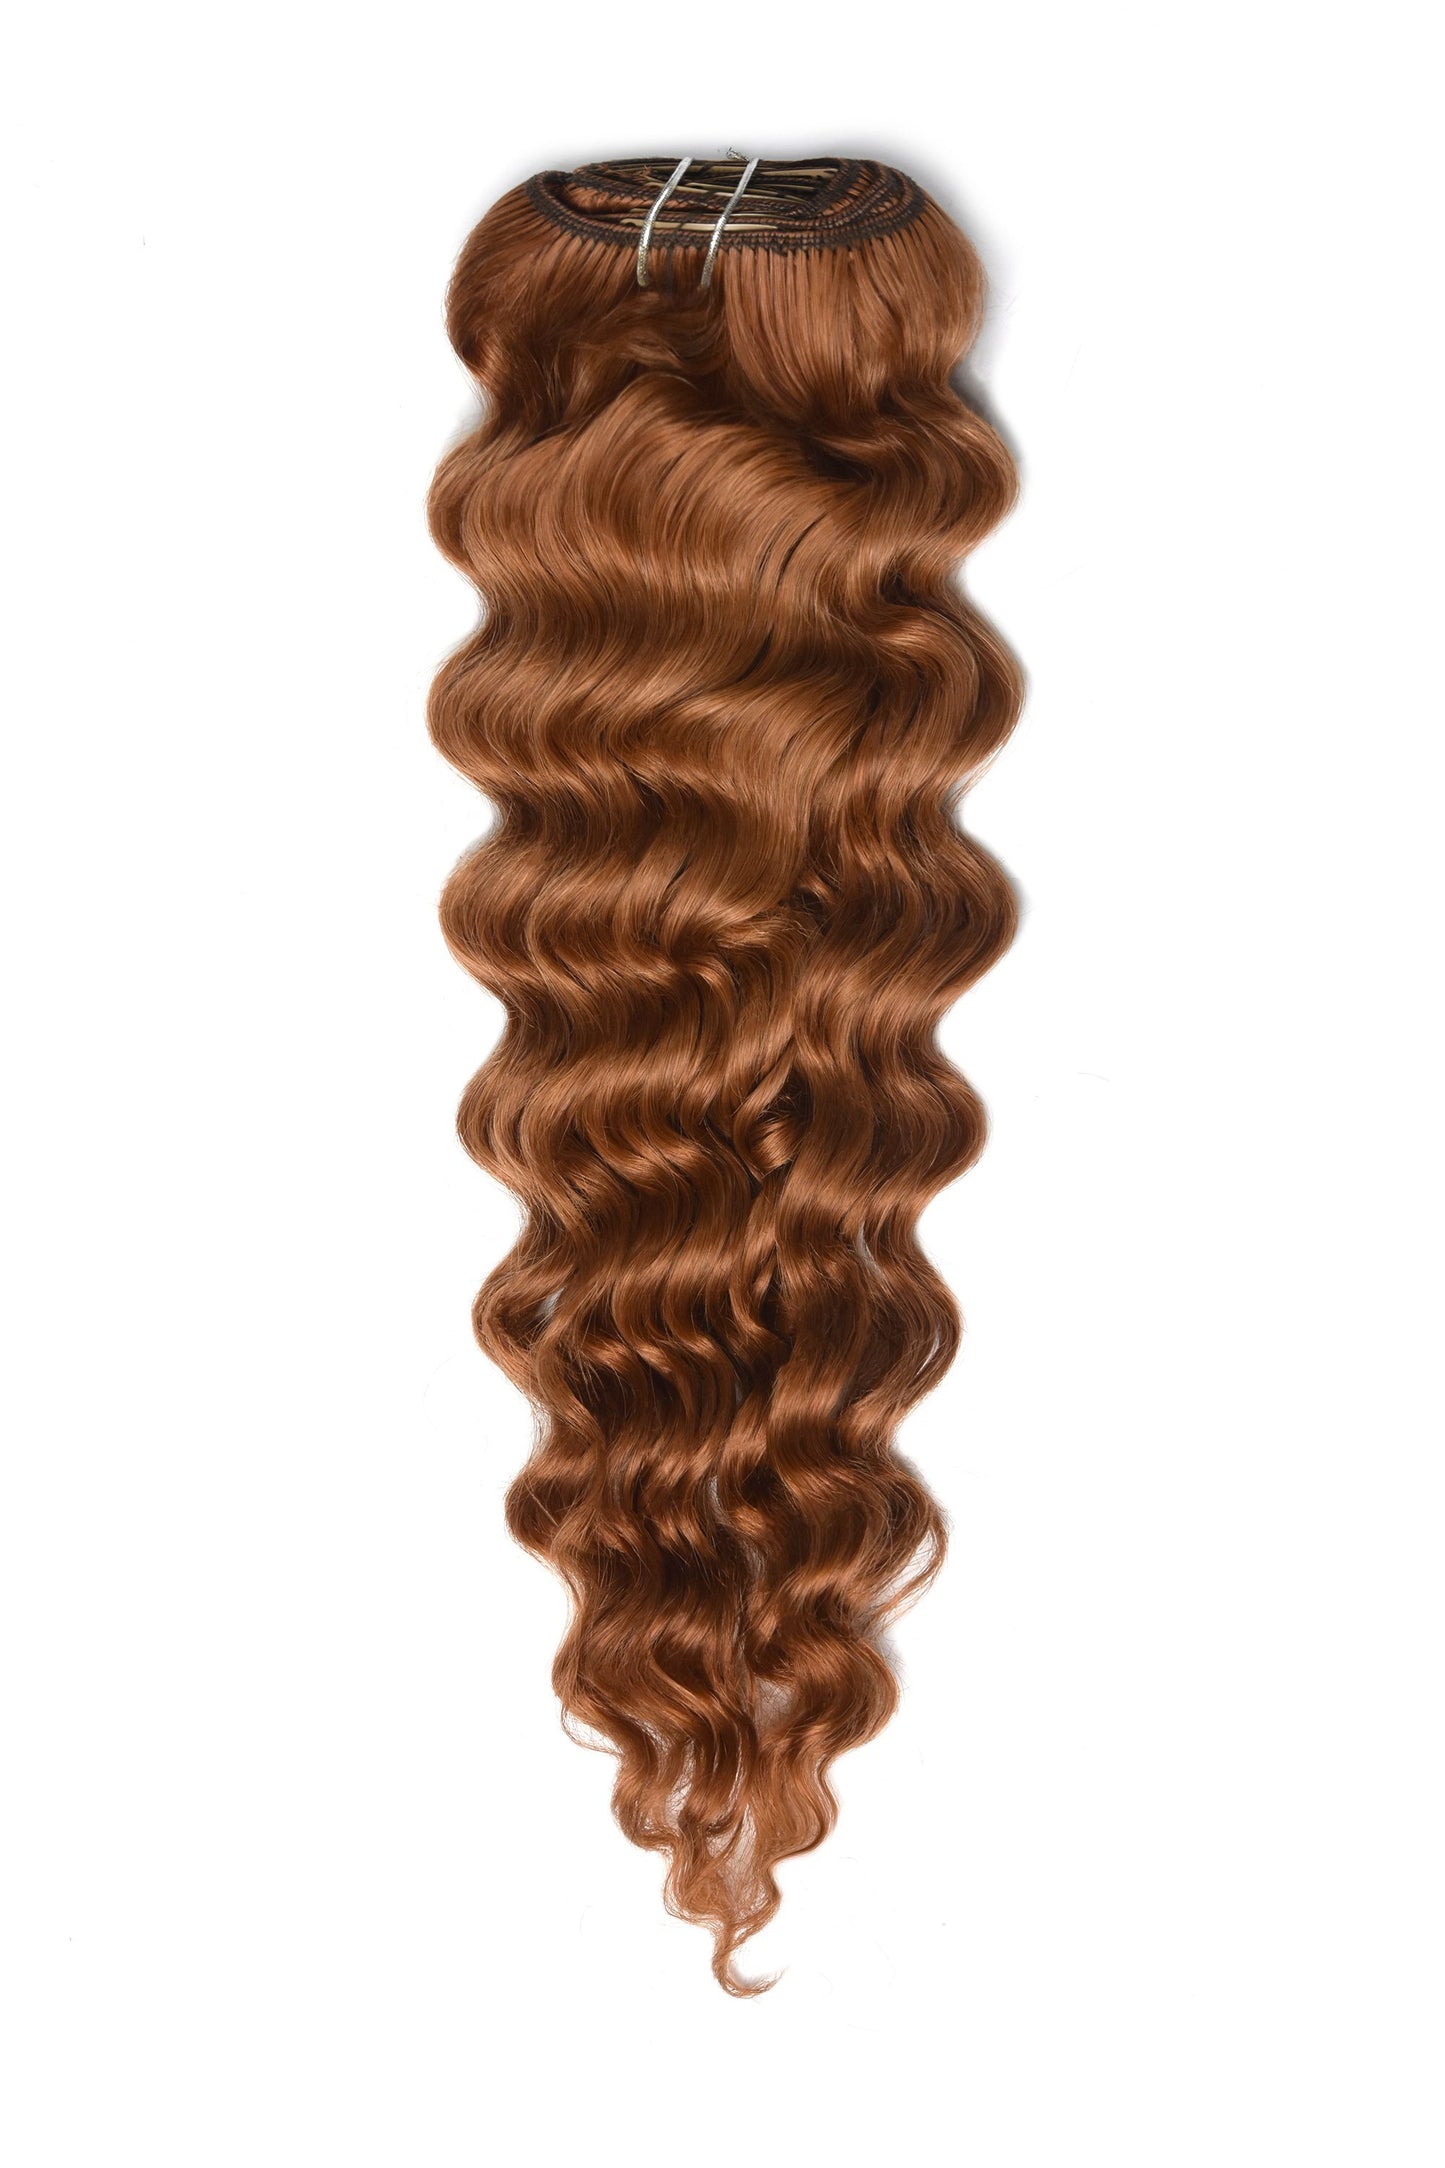 Curly Full Head Remy Clip in Human Hair Extensions - Ginger Red/Natural Red (#350) Curly Clip In Hair Extensions cliphair 